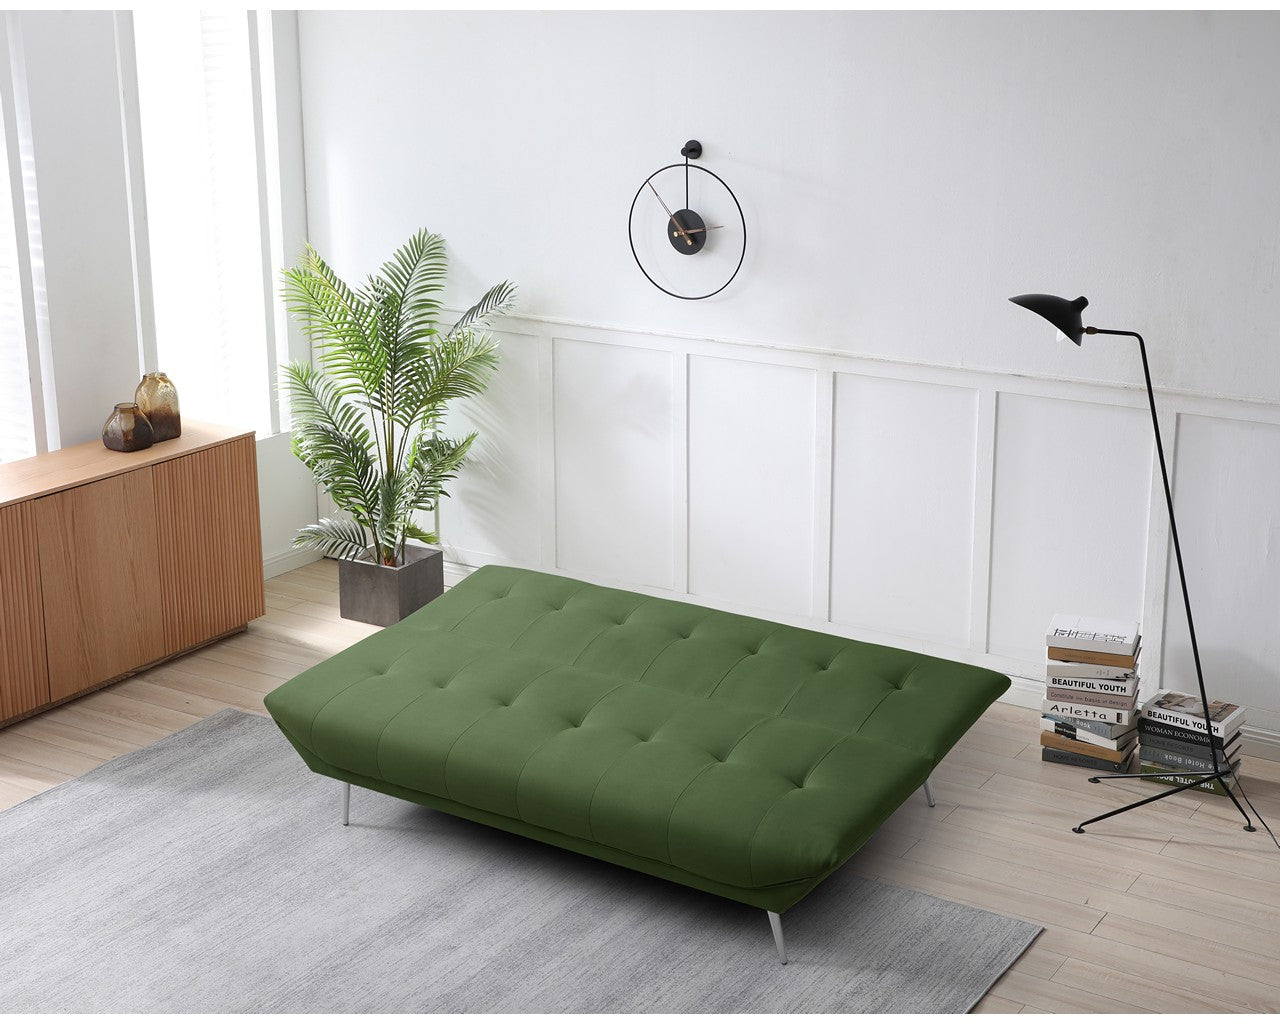 Limelight Collection - Astrid Sofa Bed